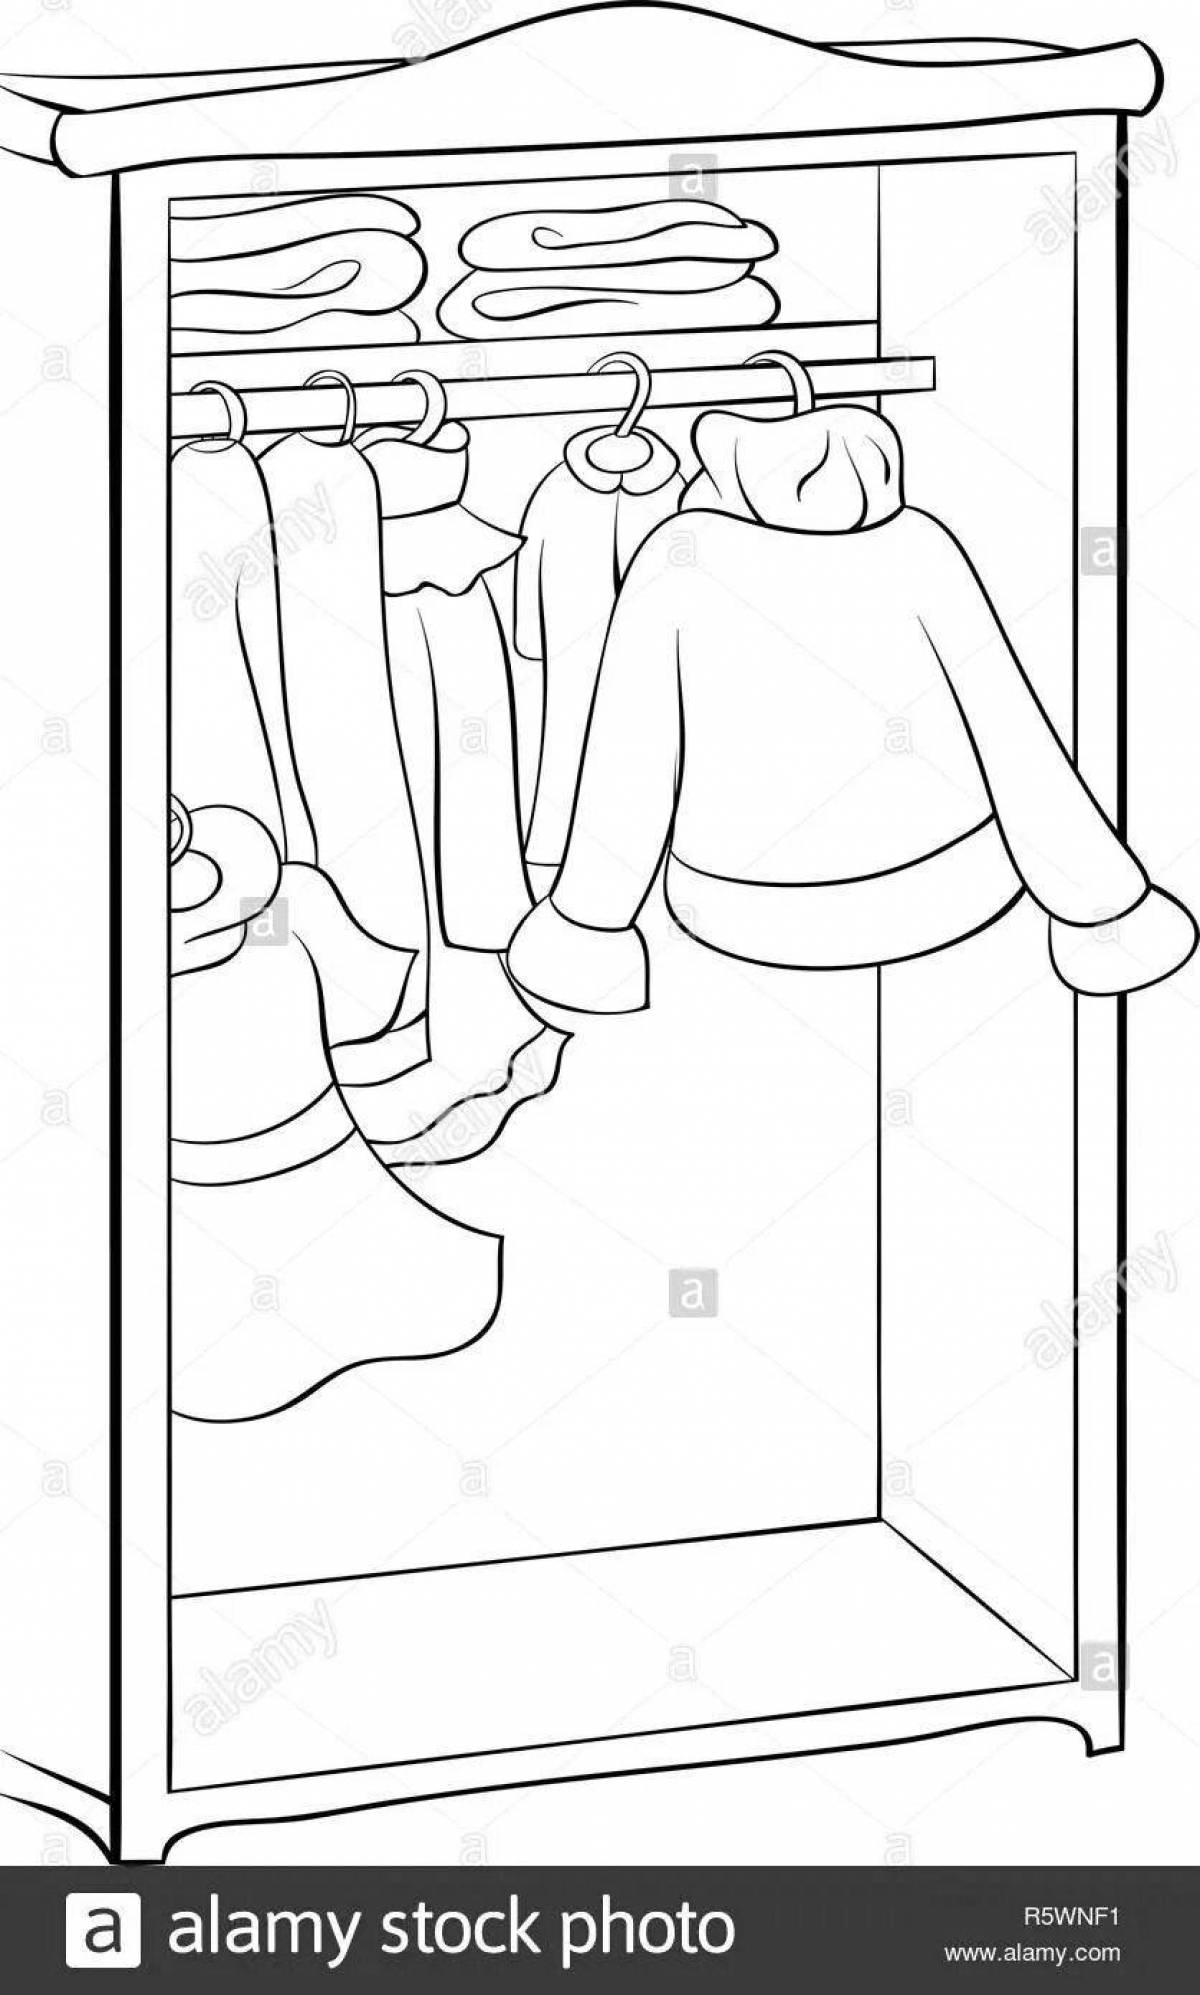 Exciting wardrobe coloring book for 3-4 year olds